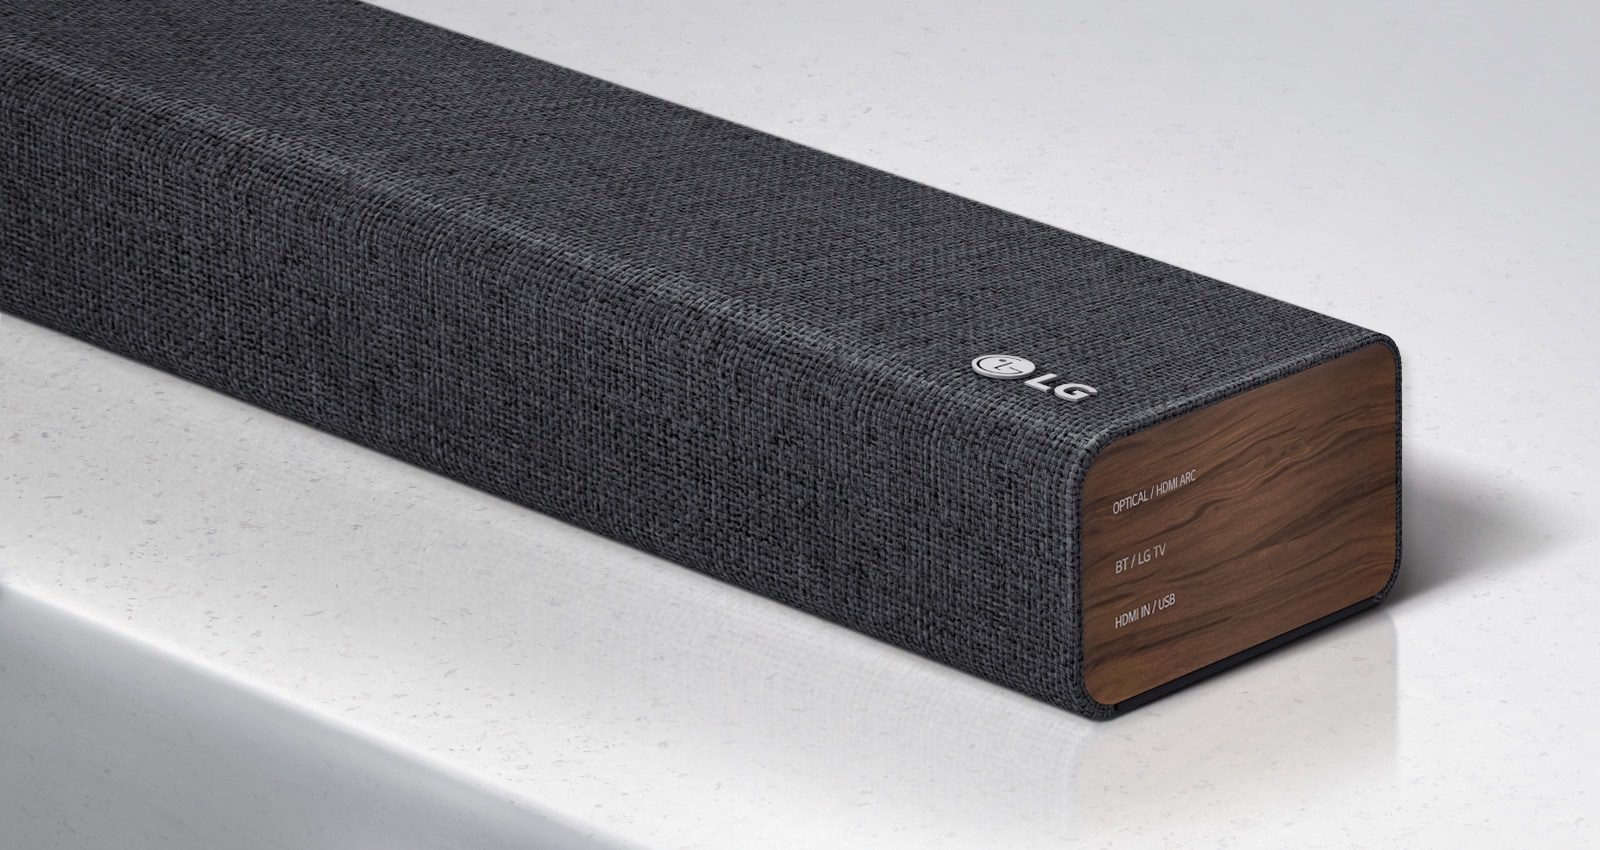 Close-up of LG Soundbar right side with LG logo shown on bottom right corner on a product.